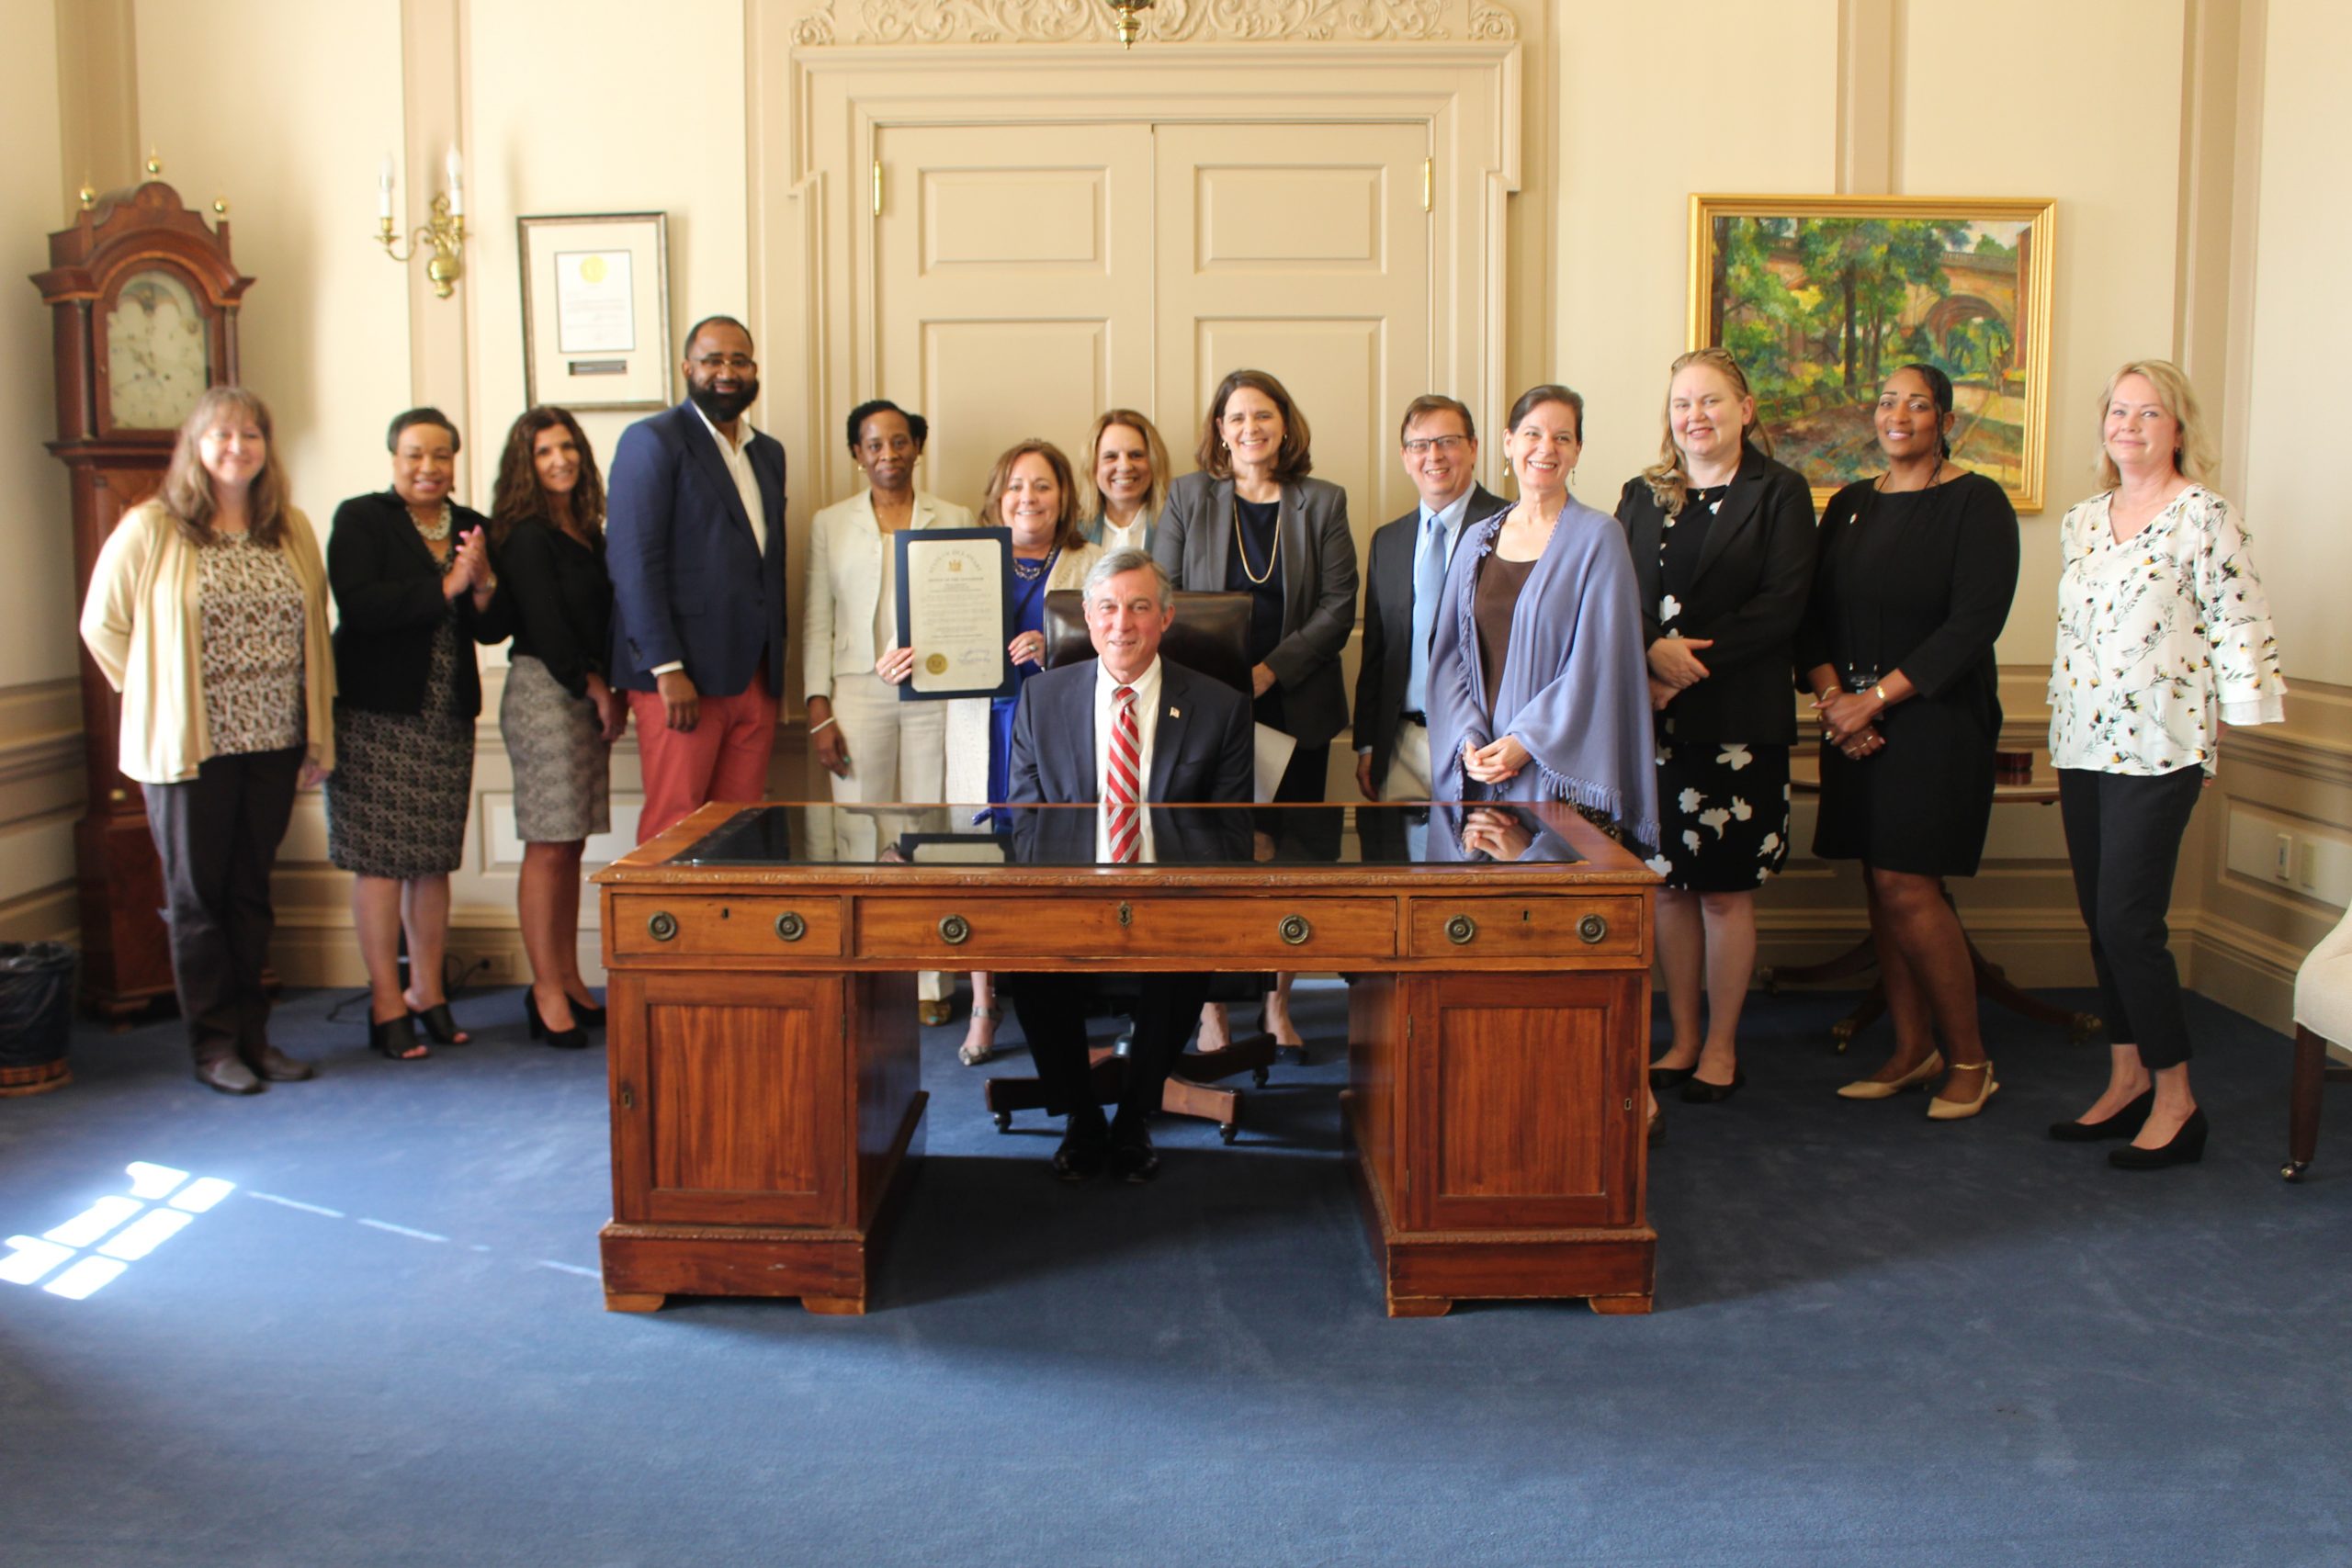 Governor Carney sits at his desk and is surrounded by employees of the Delaware Division of Human Resources. One of the employees holds up the proclamation for Public Service Recognition Week while everyone poses for a photo.